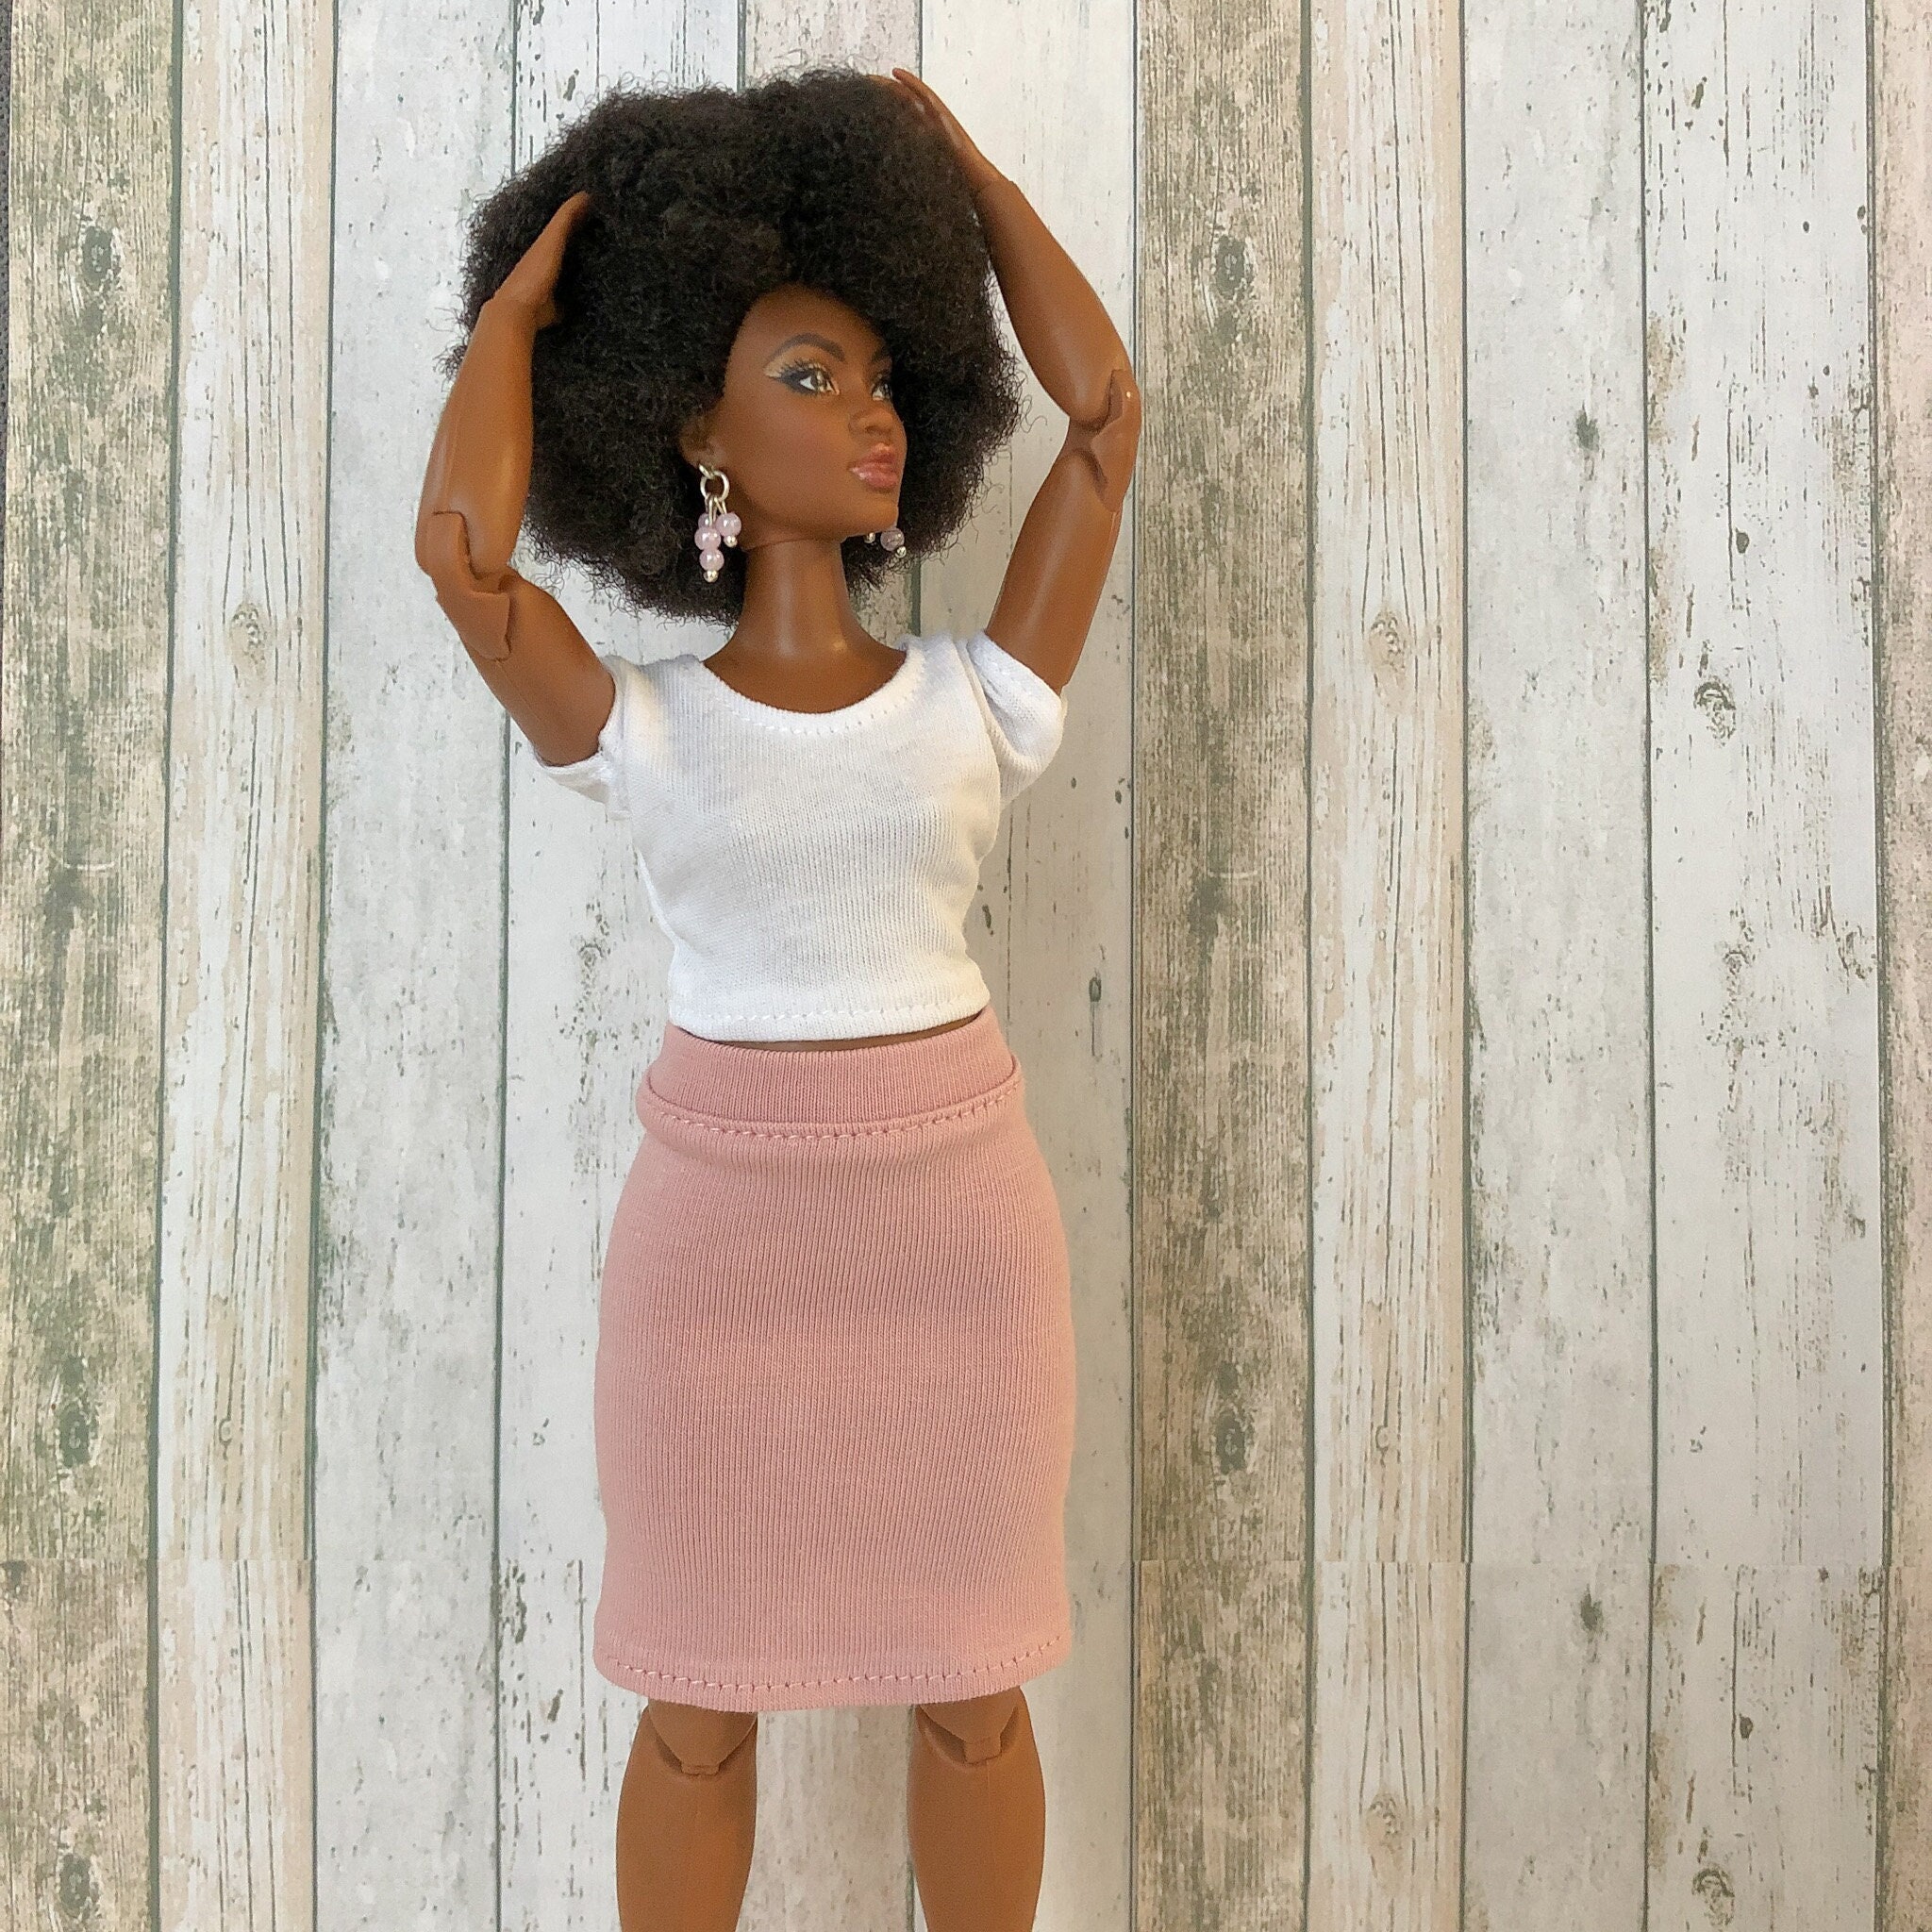 Black Tailcoat and Pants for Curvy Barbie Doll 